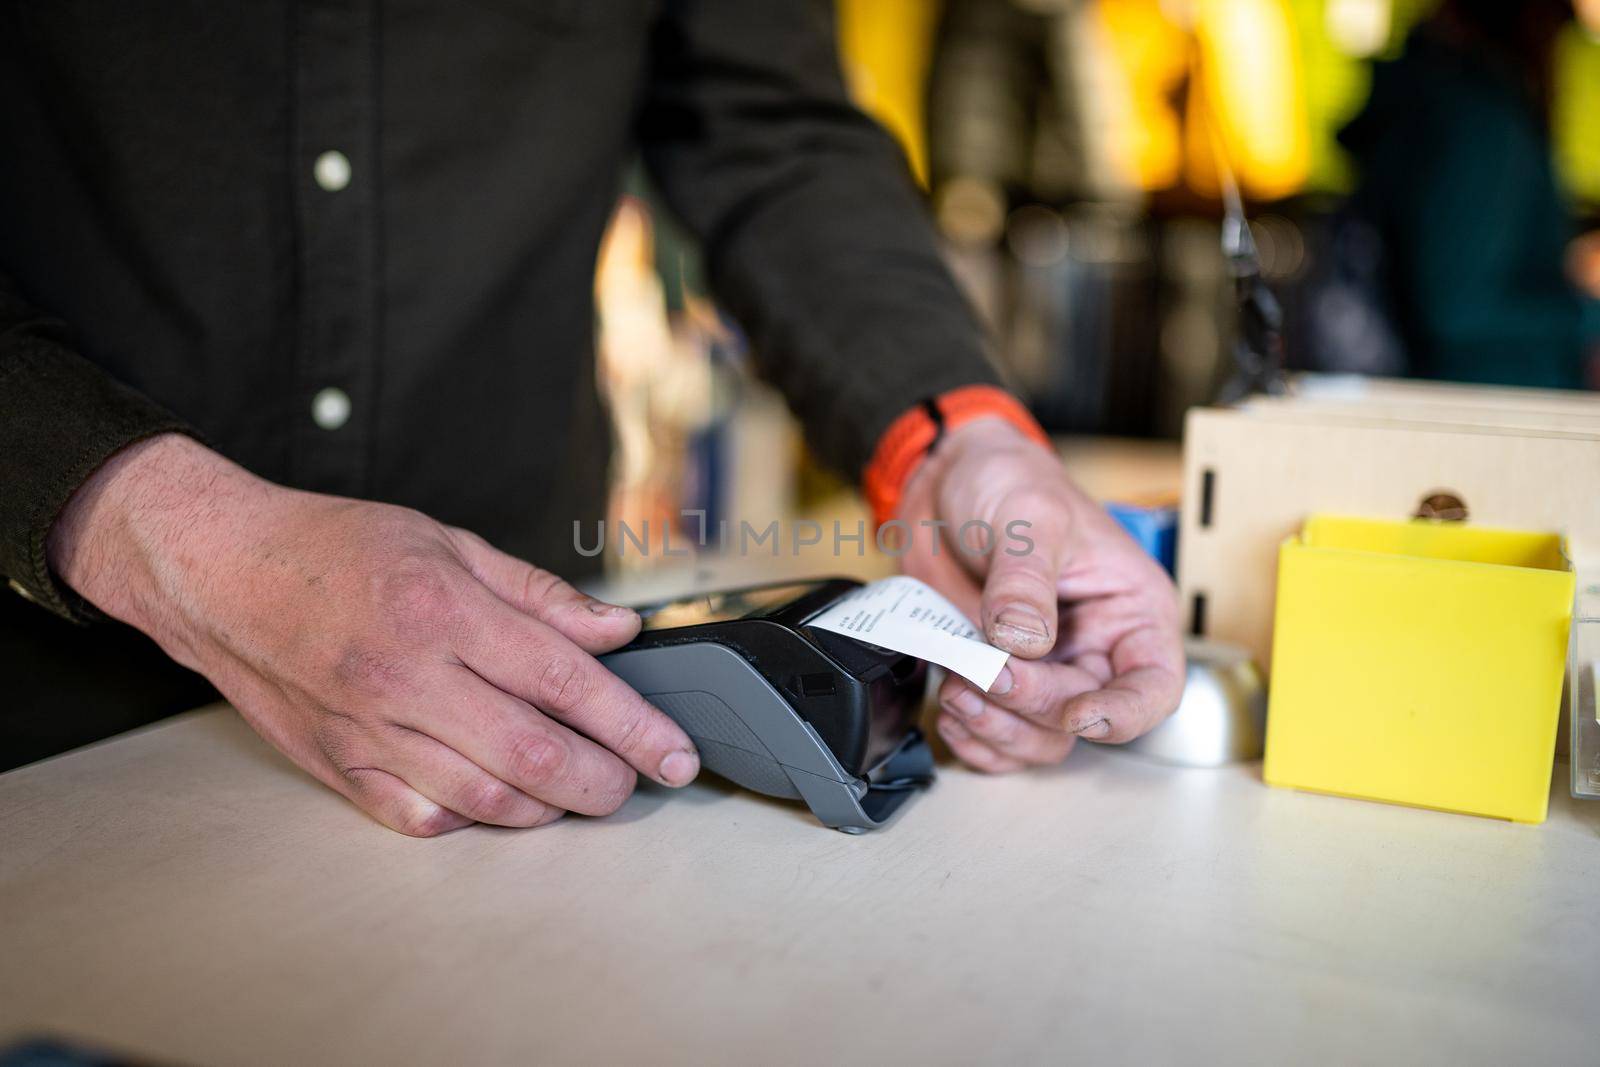 Close-up of the hands of a male salesman cashier holding POS terminal and paper receipt behind the counter of a sports store. Cashless technology and credit card payment concept. Card swipe machine by Tomashevska